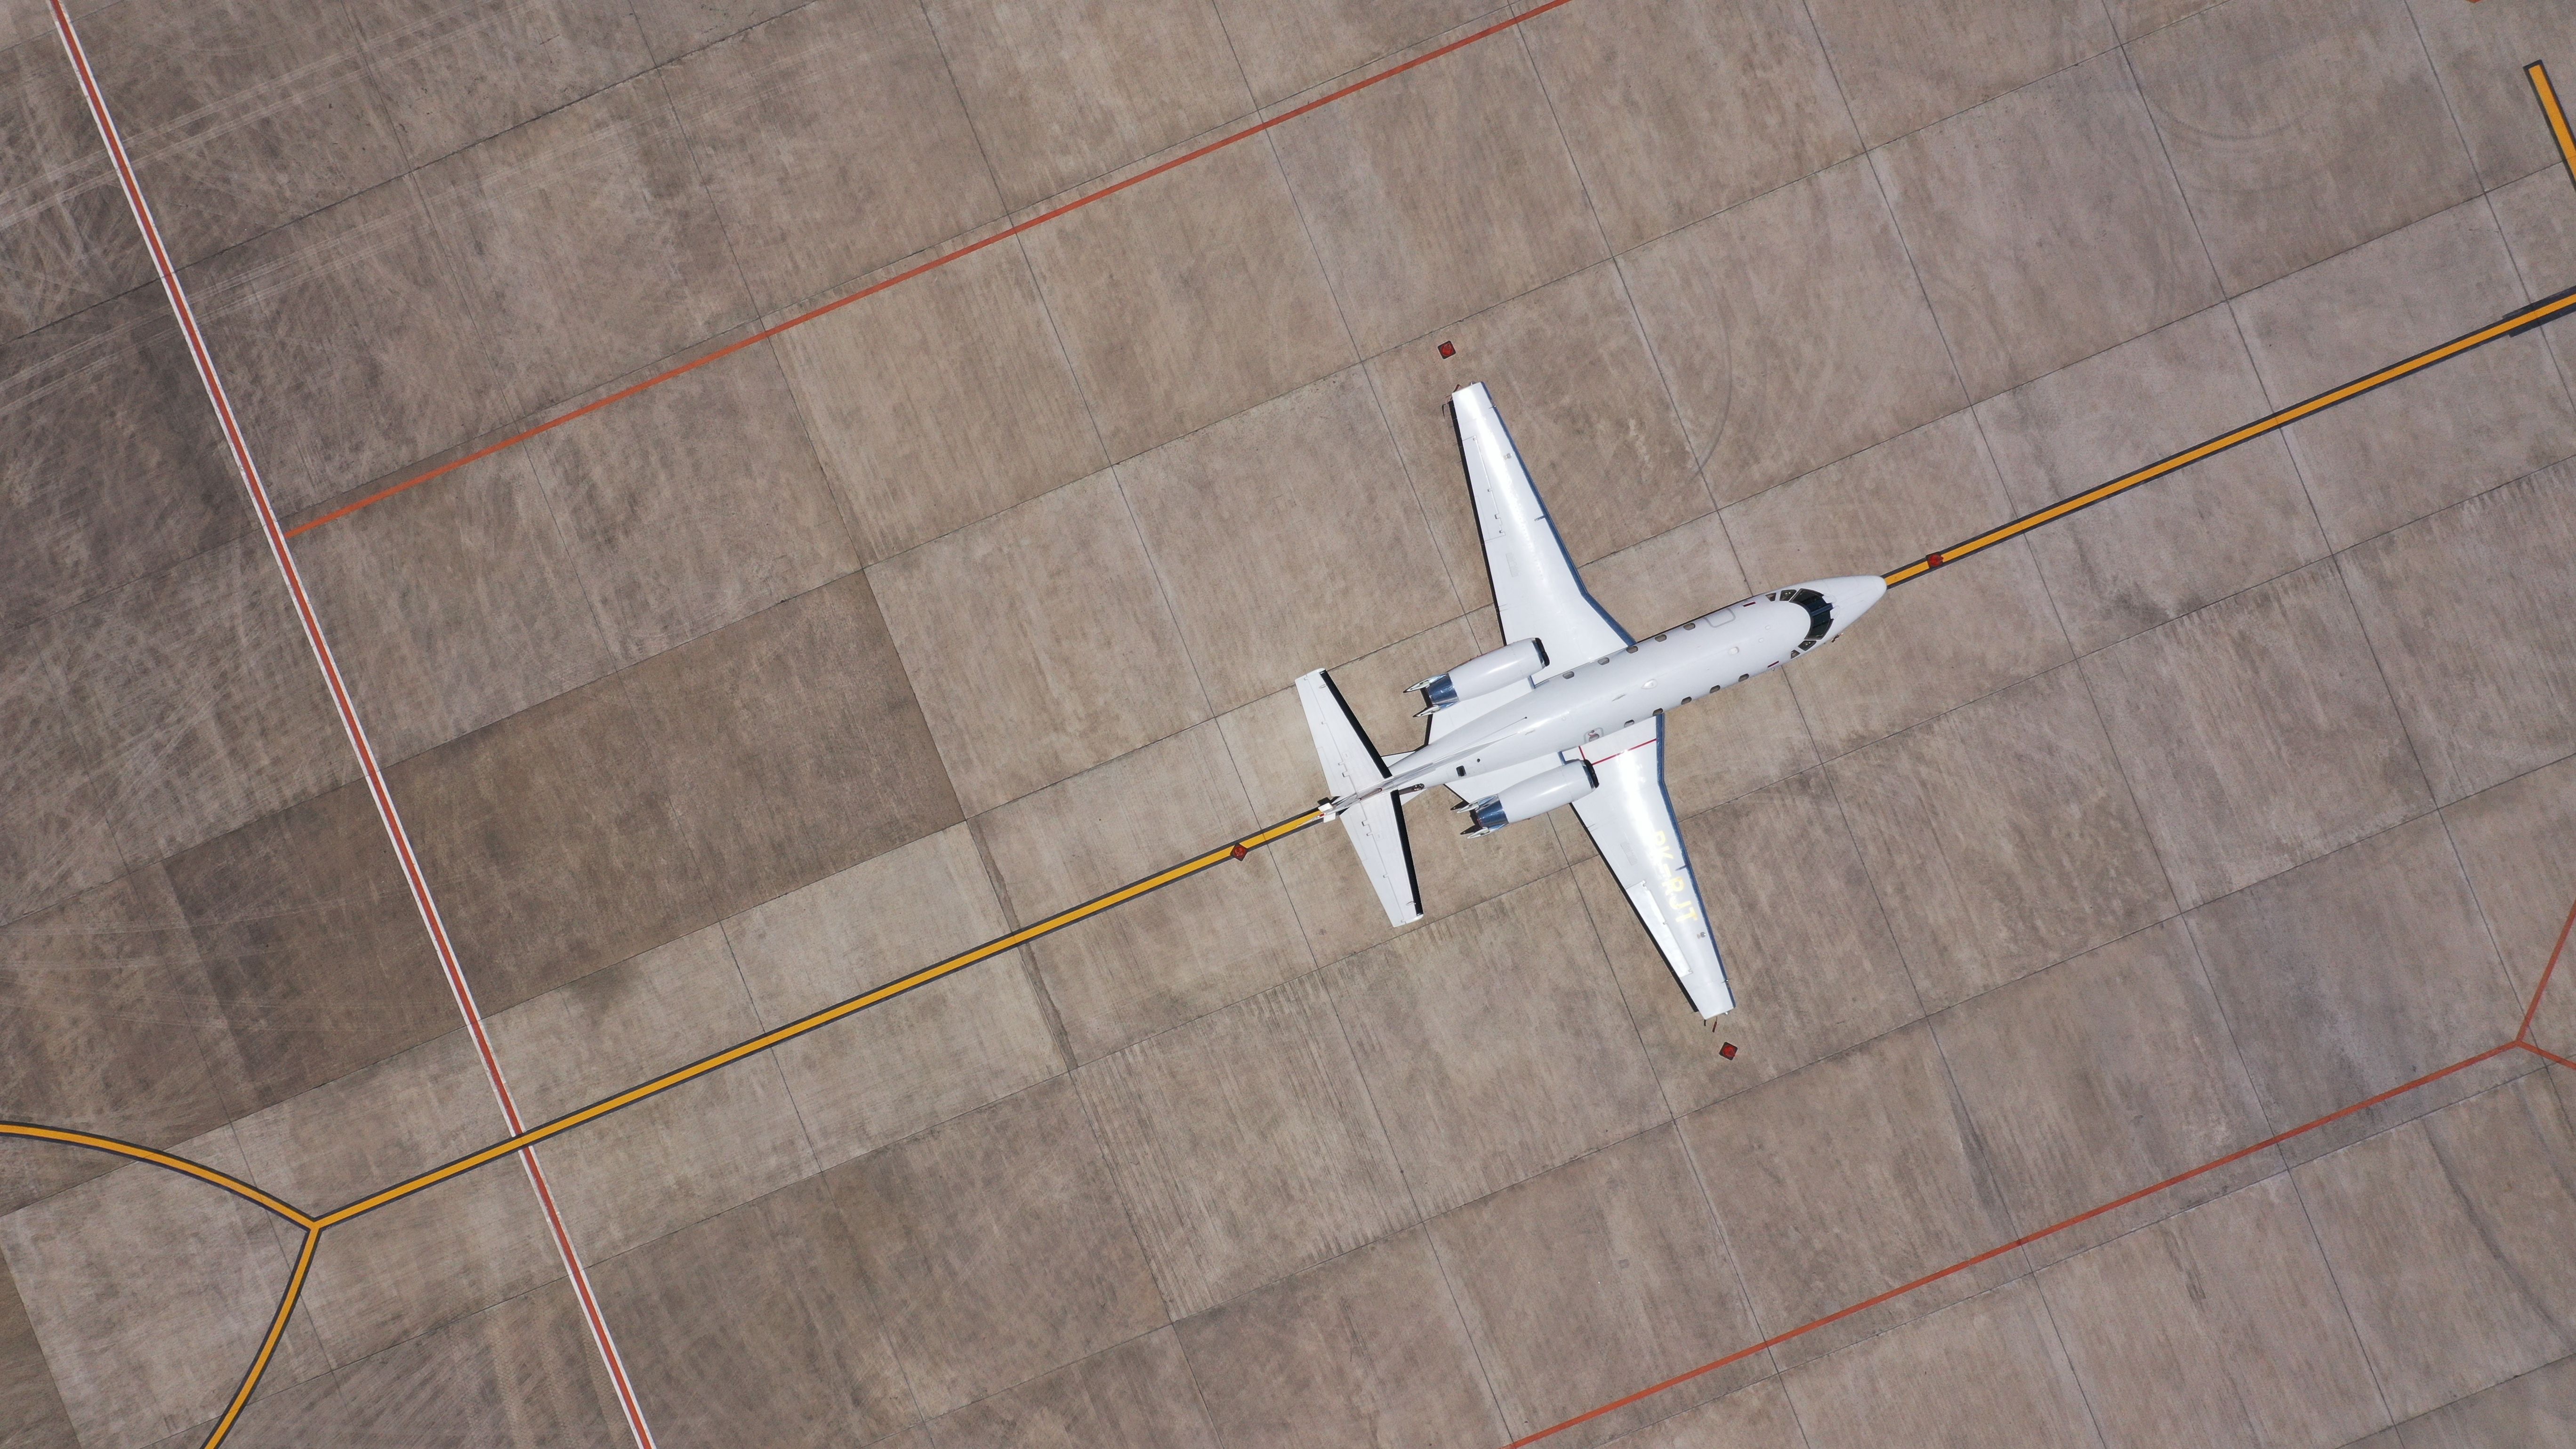 An overhead view of a private jet parked at an airport.